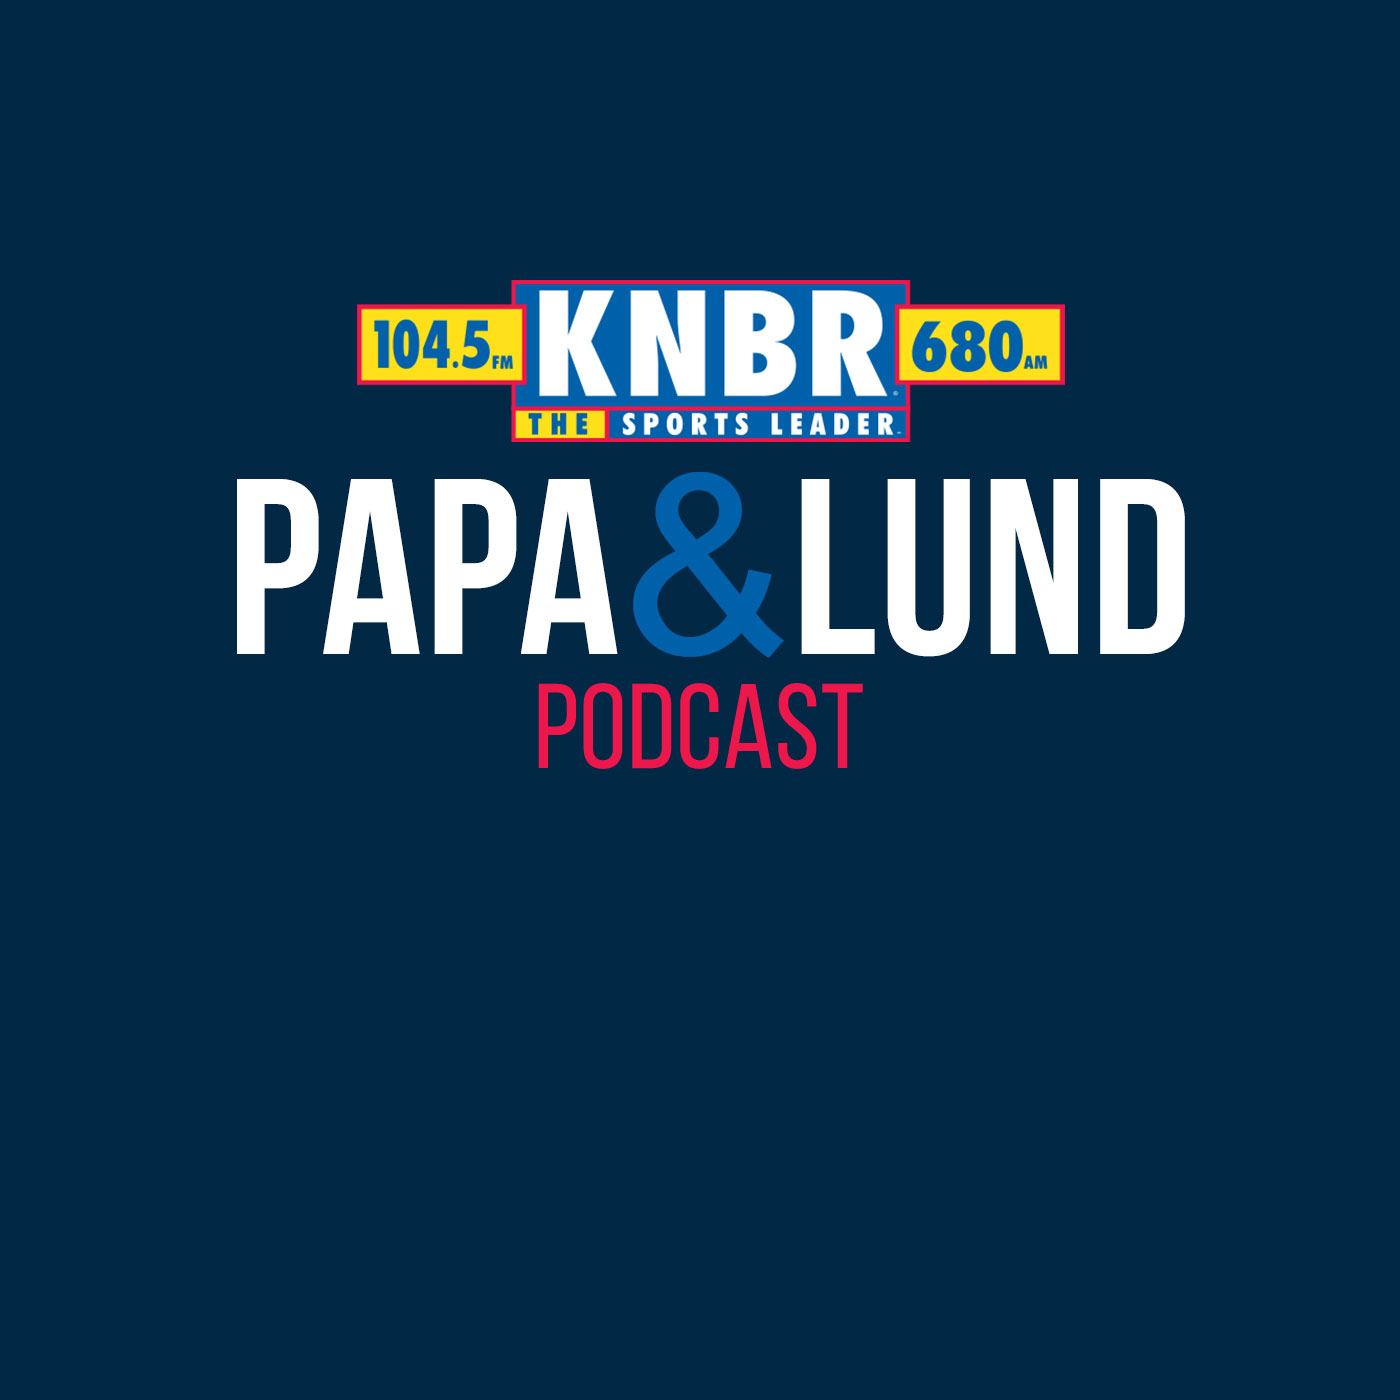 11-8 Donte Whitner joins Papa & Lund to discuss the addition of Chase Young and how being surrounded by Pro Bowlers will make everyone take their game to another level